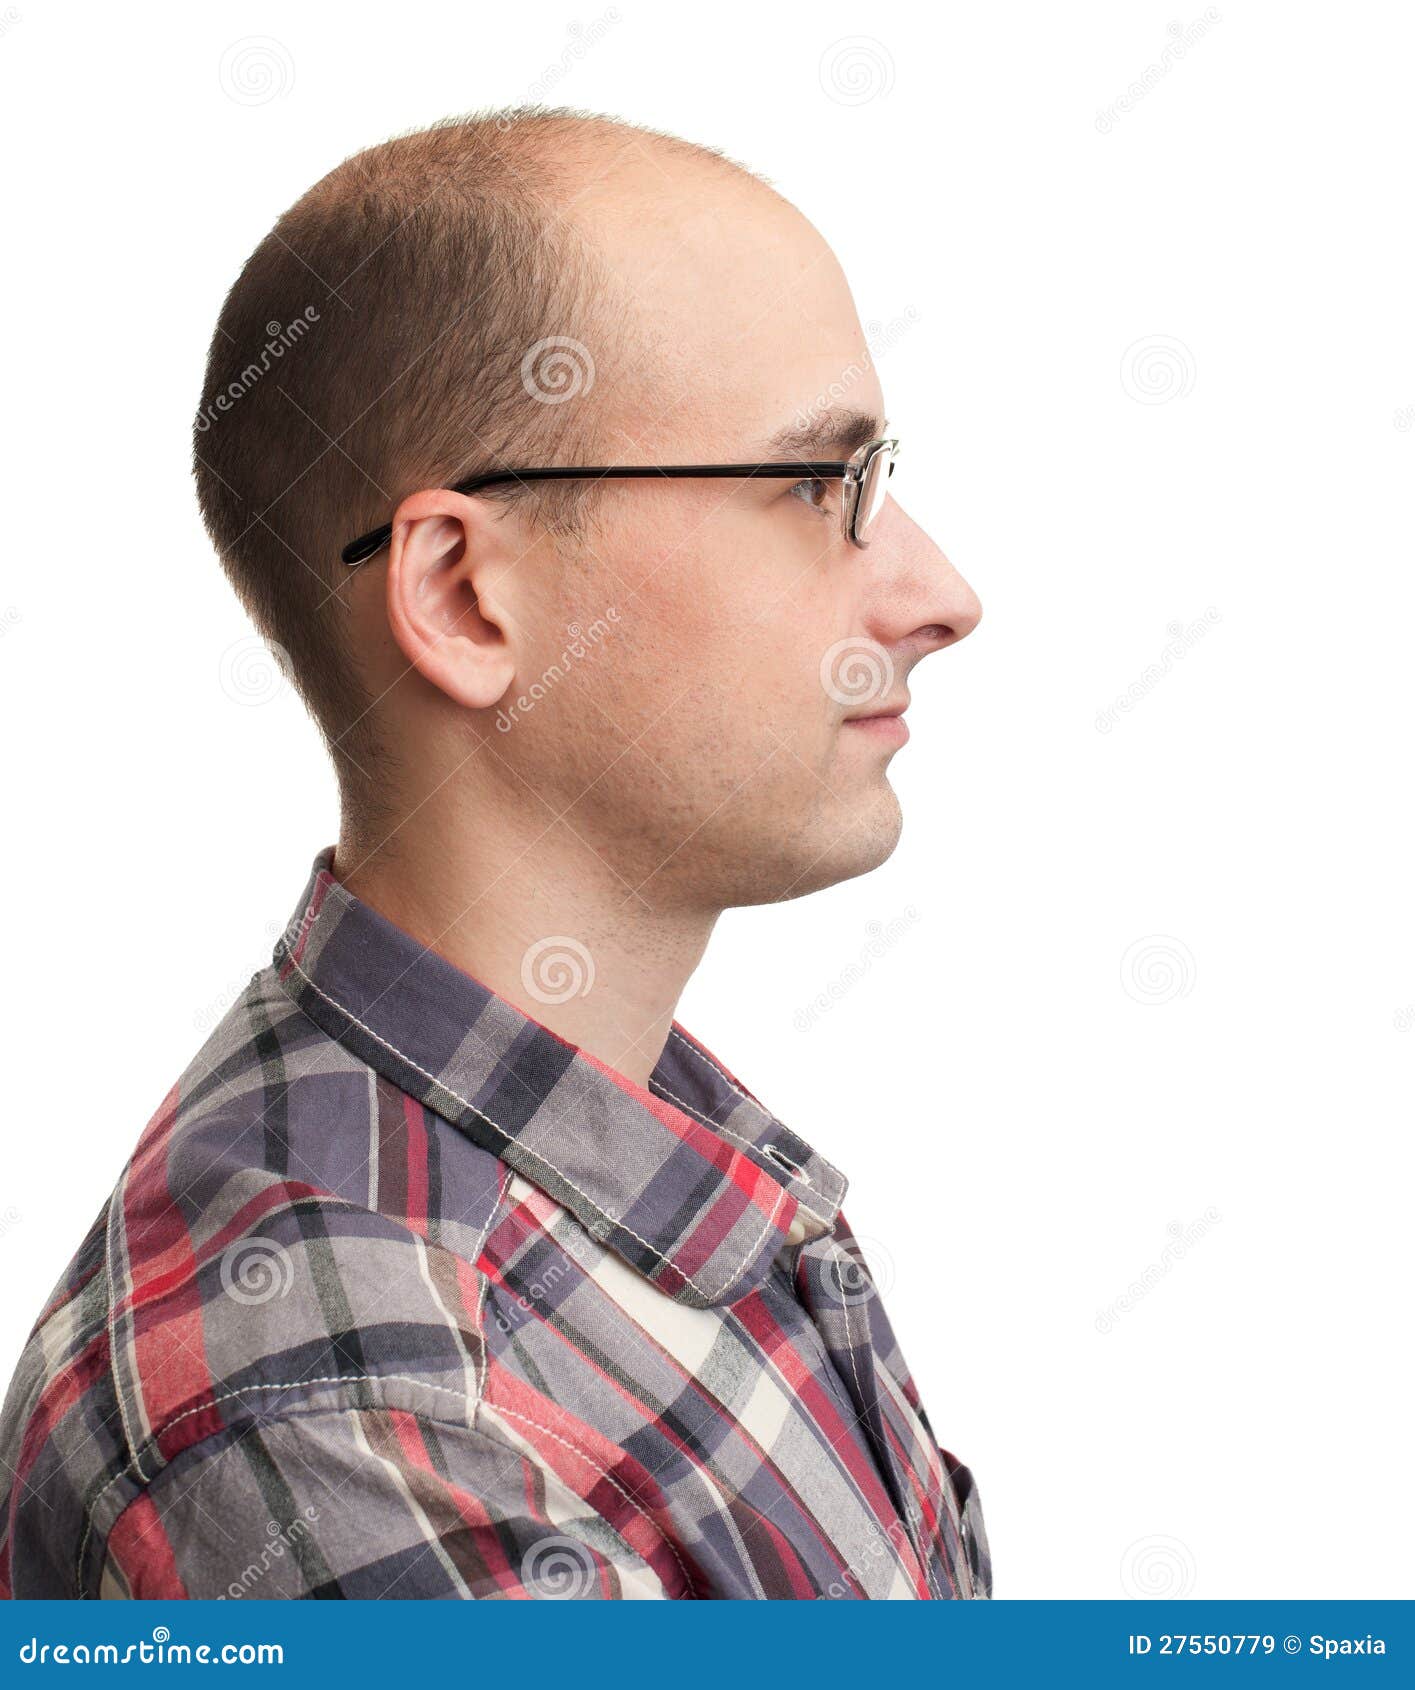 Profile view of man with eyeglasses Royalty Free Stock Images - profile-view-man-eyeglasses-27550779